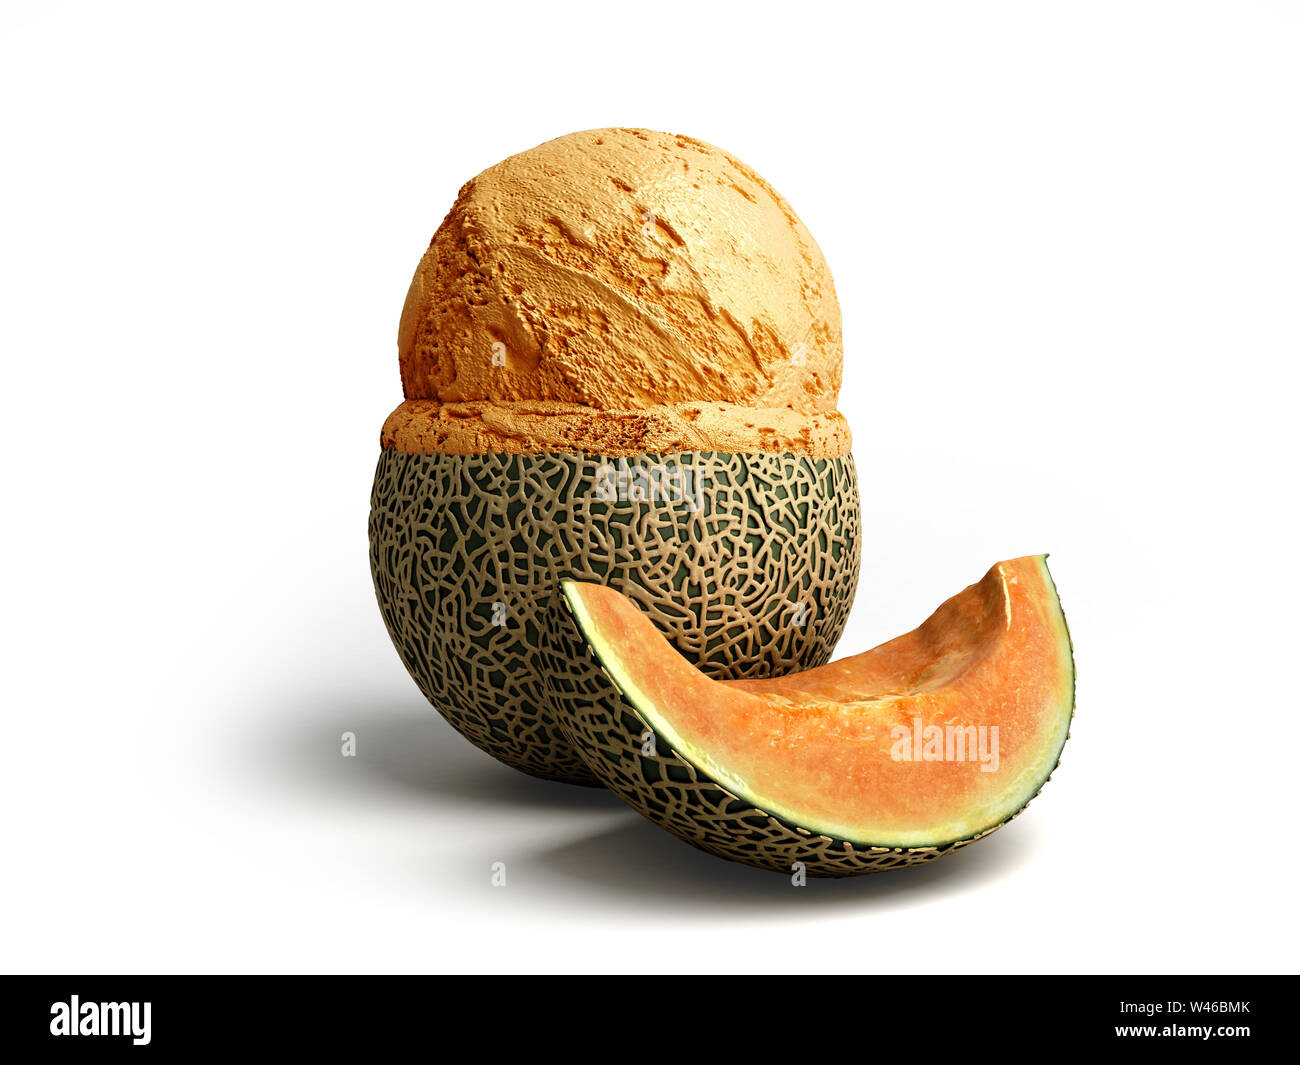 modern concept of fruit ice cream A melon ice cream ball lies on a roasted melon 3d render on white background Stock Photo